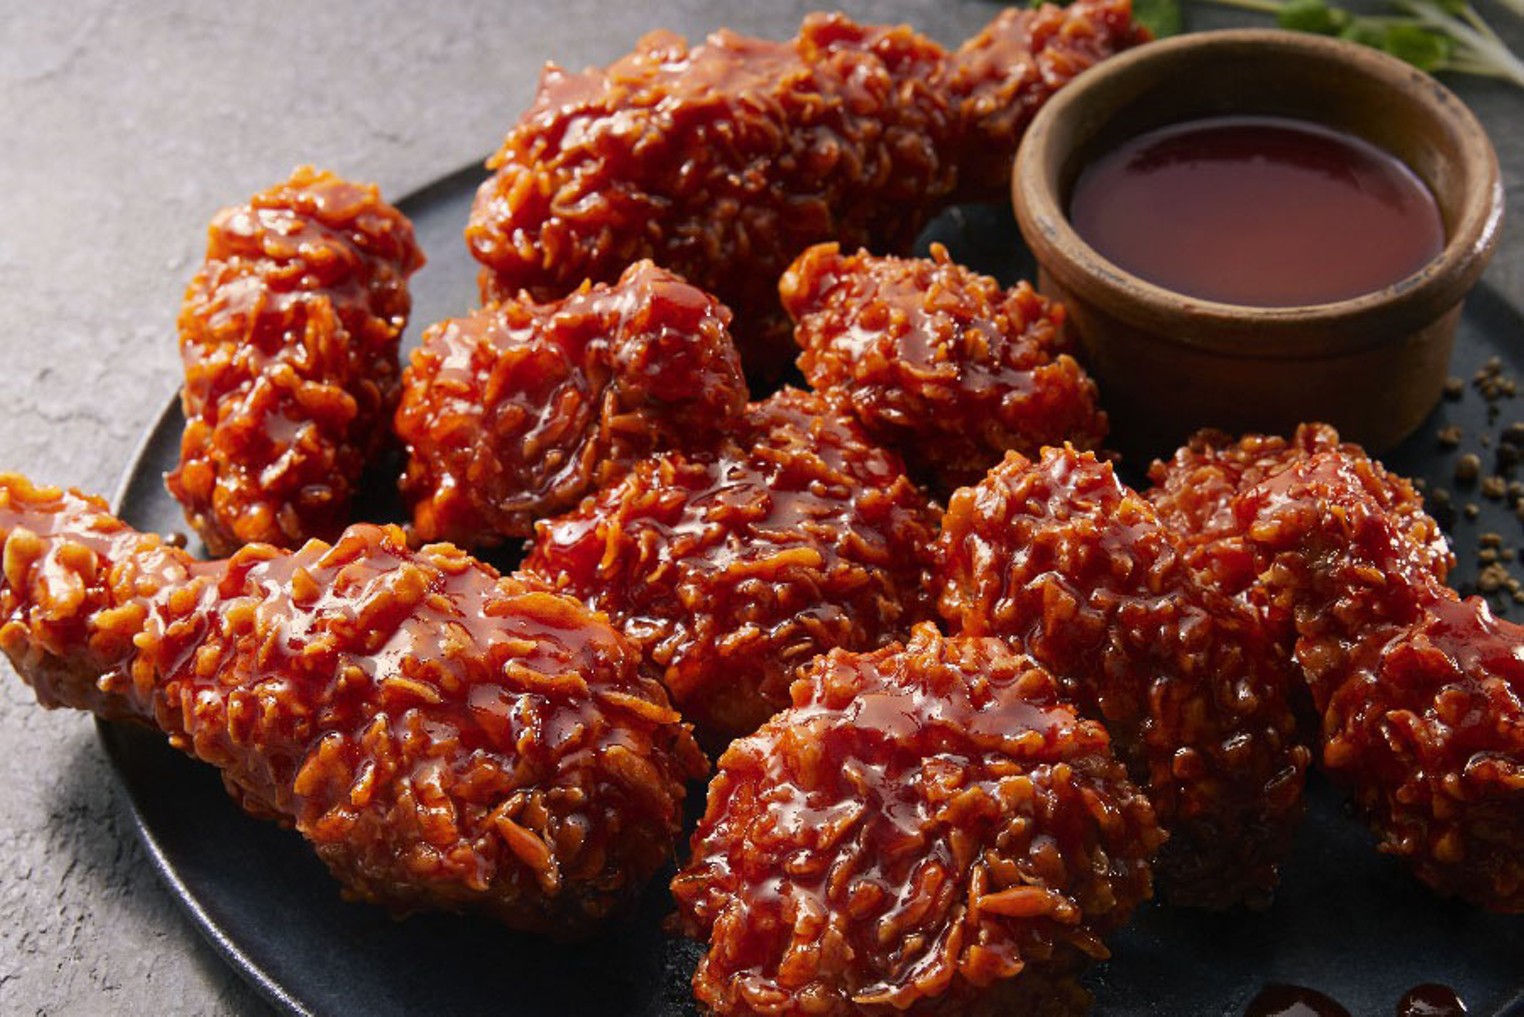 This Korean Fried Chicken Chain Is Planning a Big Colorado Expansion